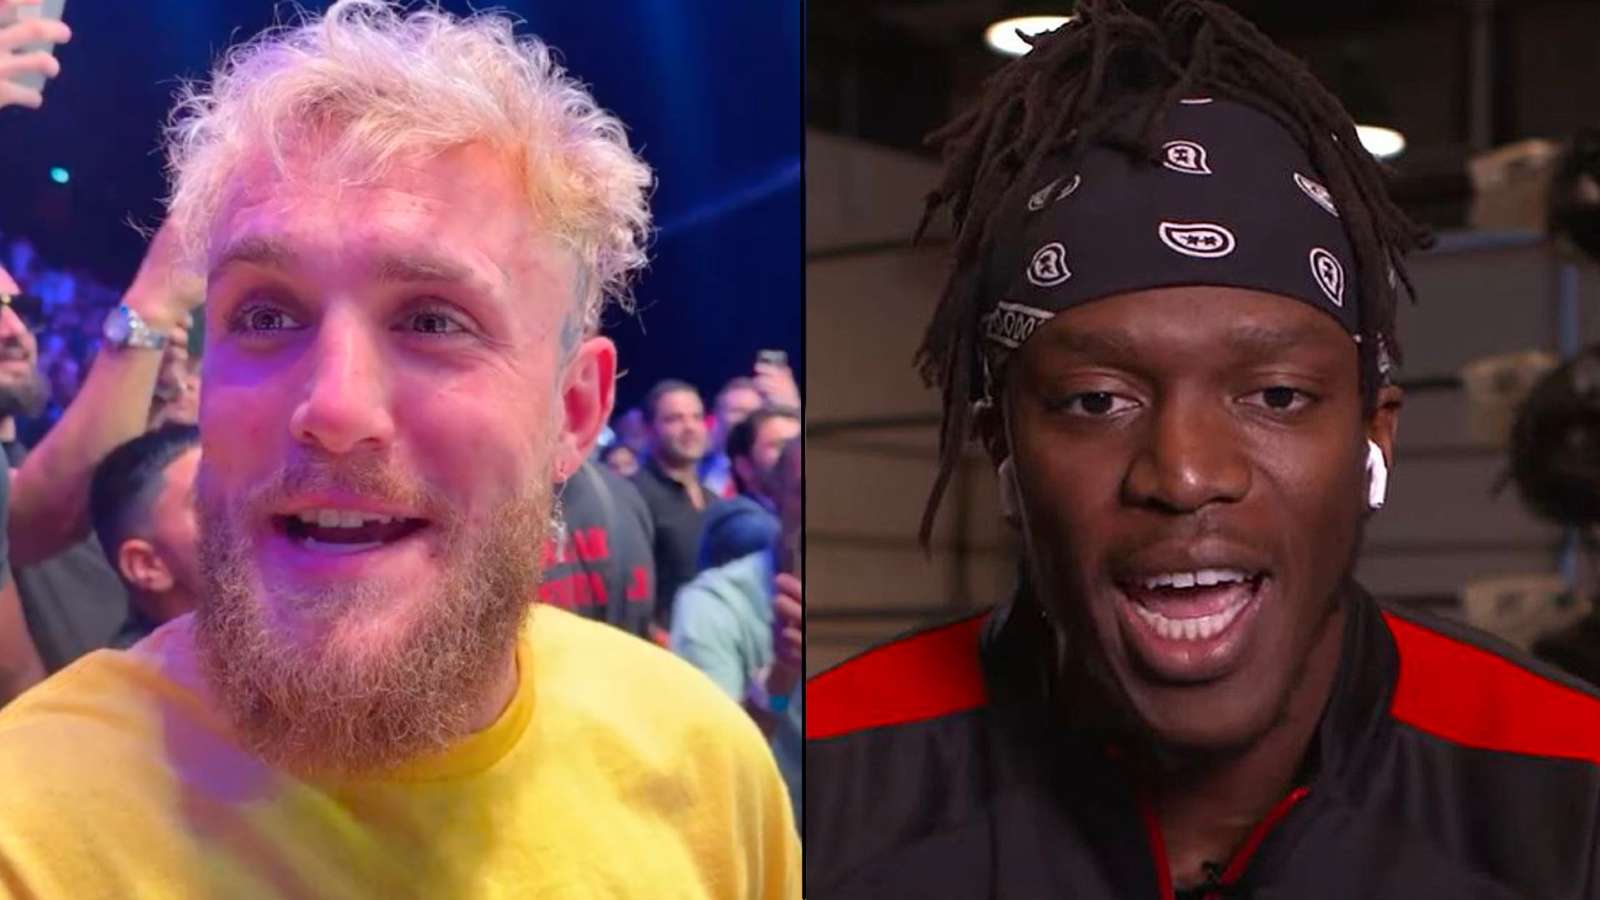 Jake Paul and KSI have been on a boxing match crash course and it's finally coming to a head.